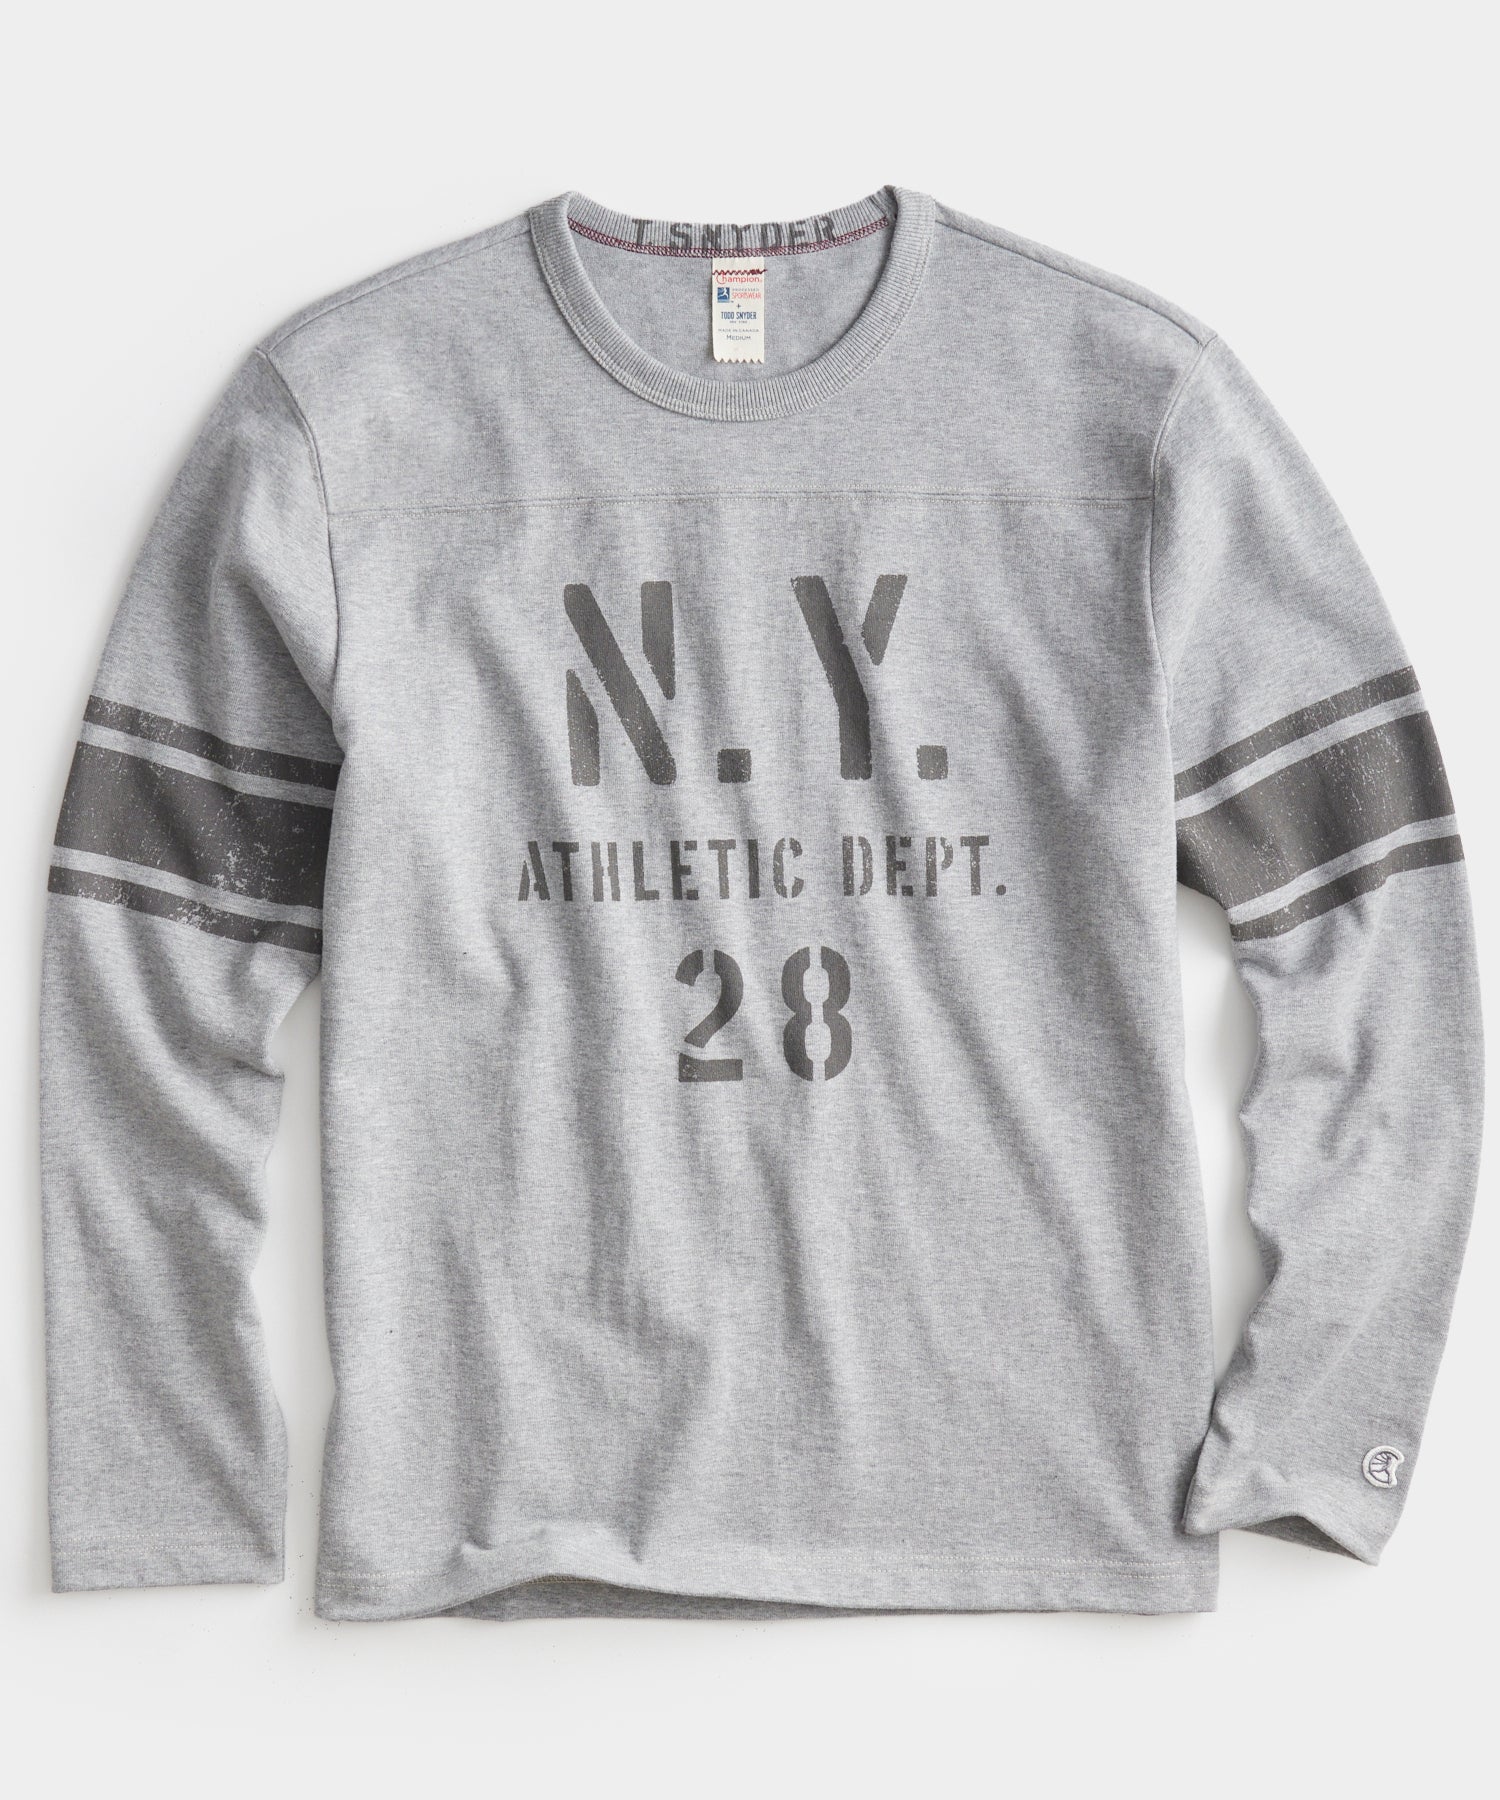 LS NY Athletic Dept. 28 with Sleeve Stripe in Grey Mix